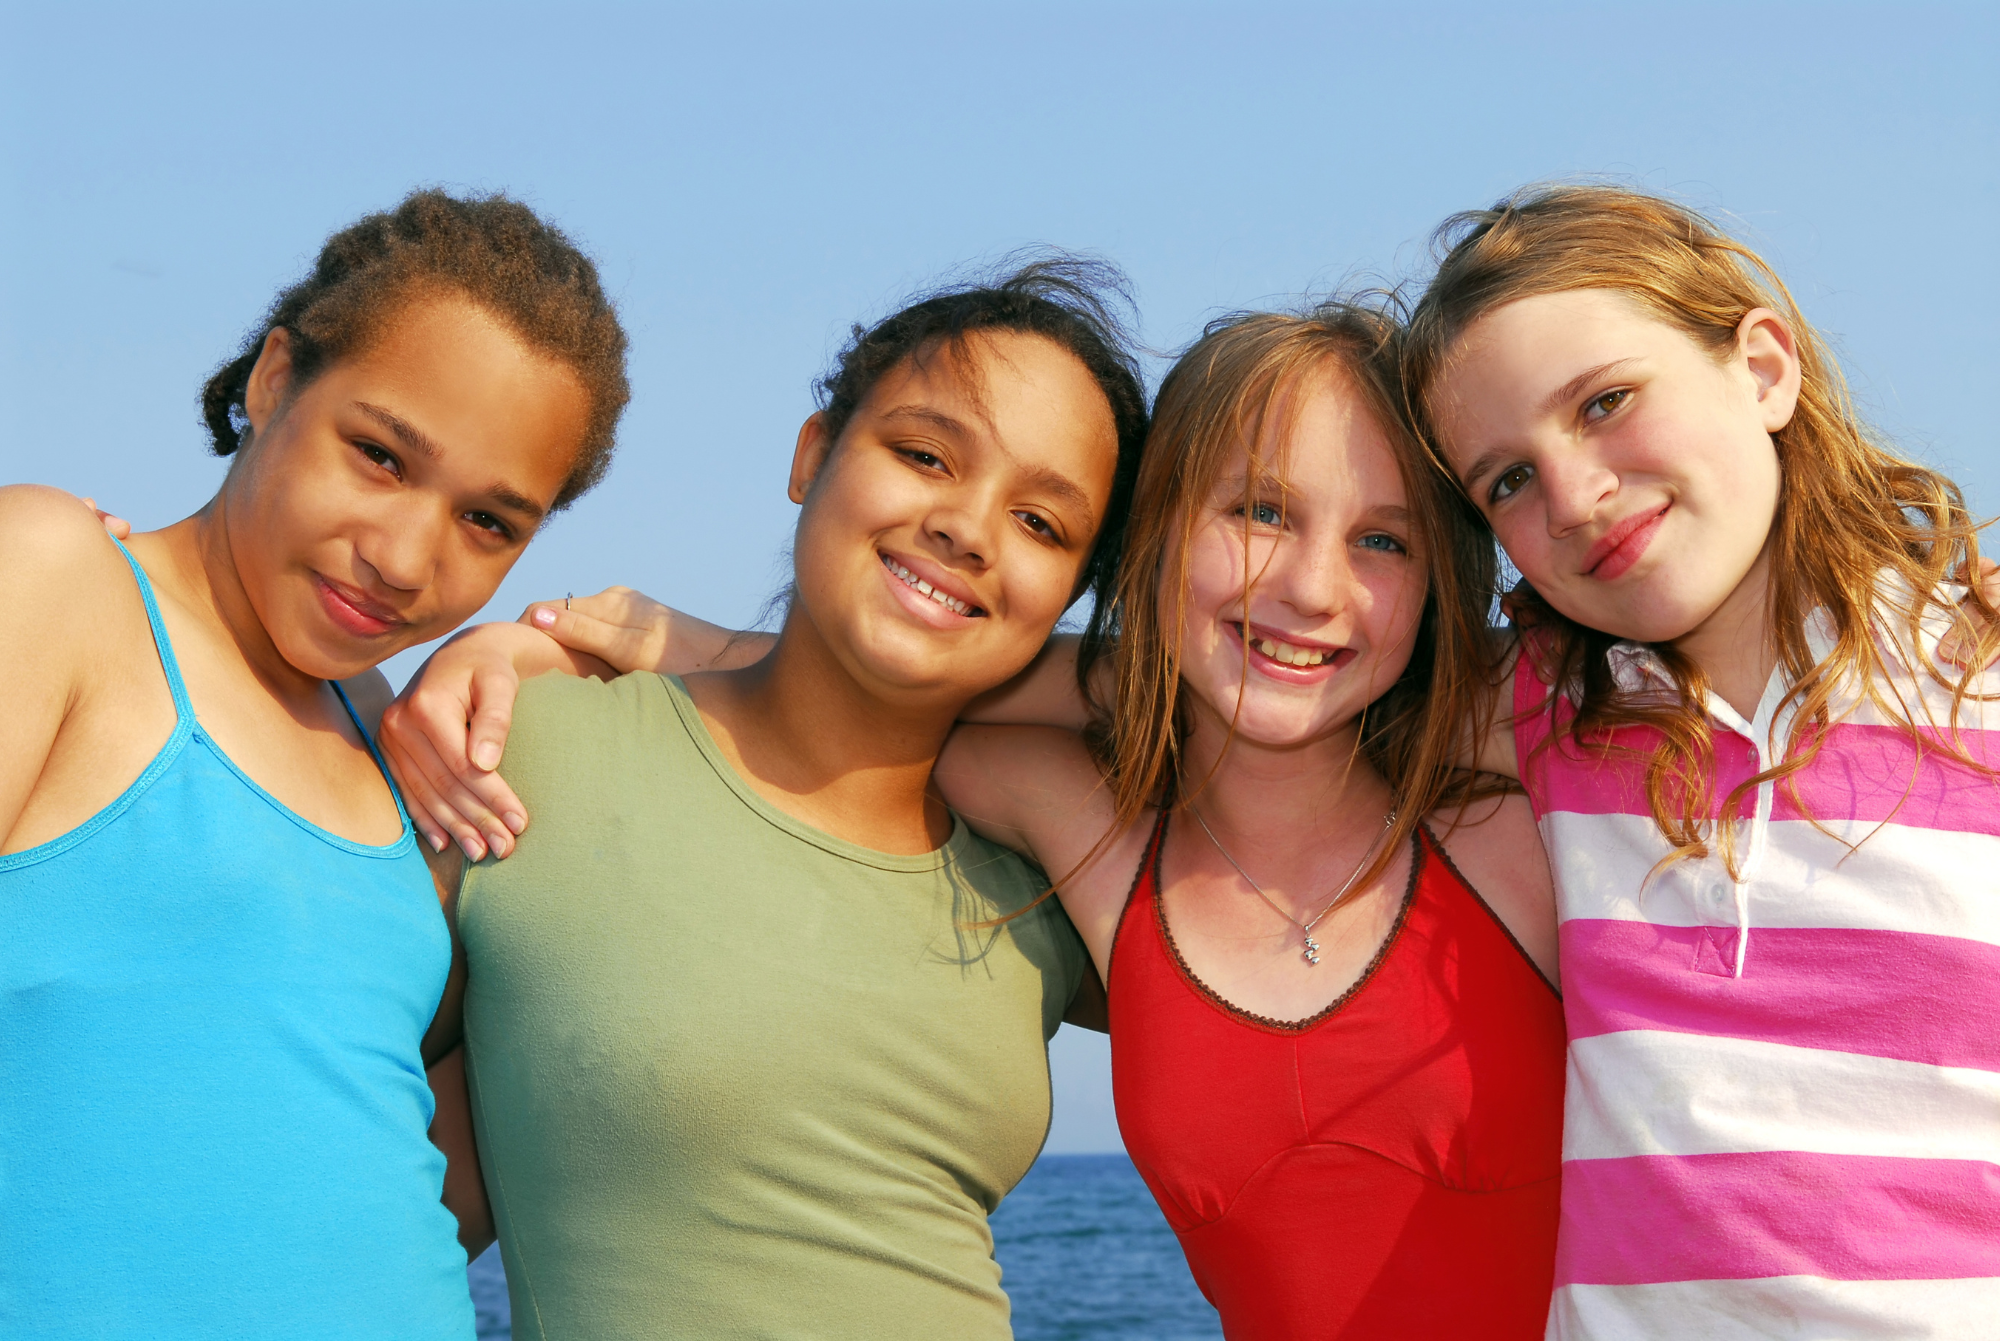 Four tween or teen girls wearing colorful tops stand with their arms around each other smiling in the sunlight because they know they are still enough.